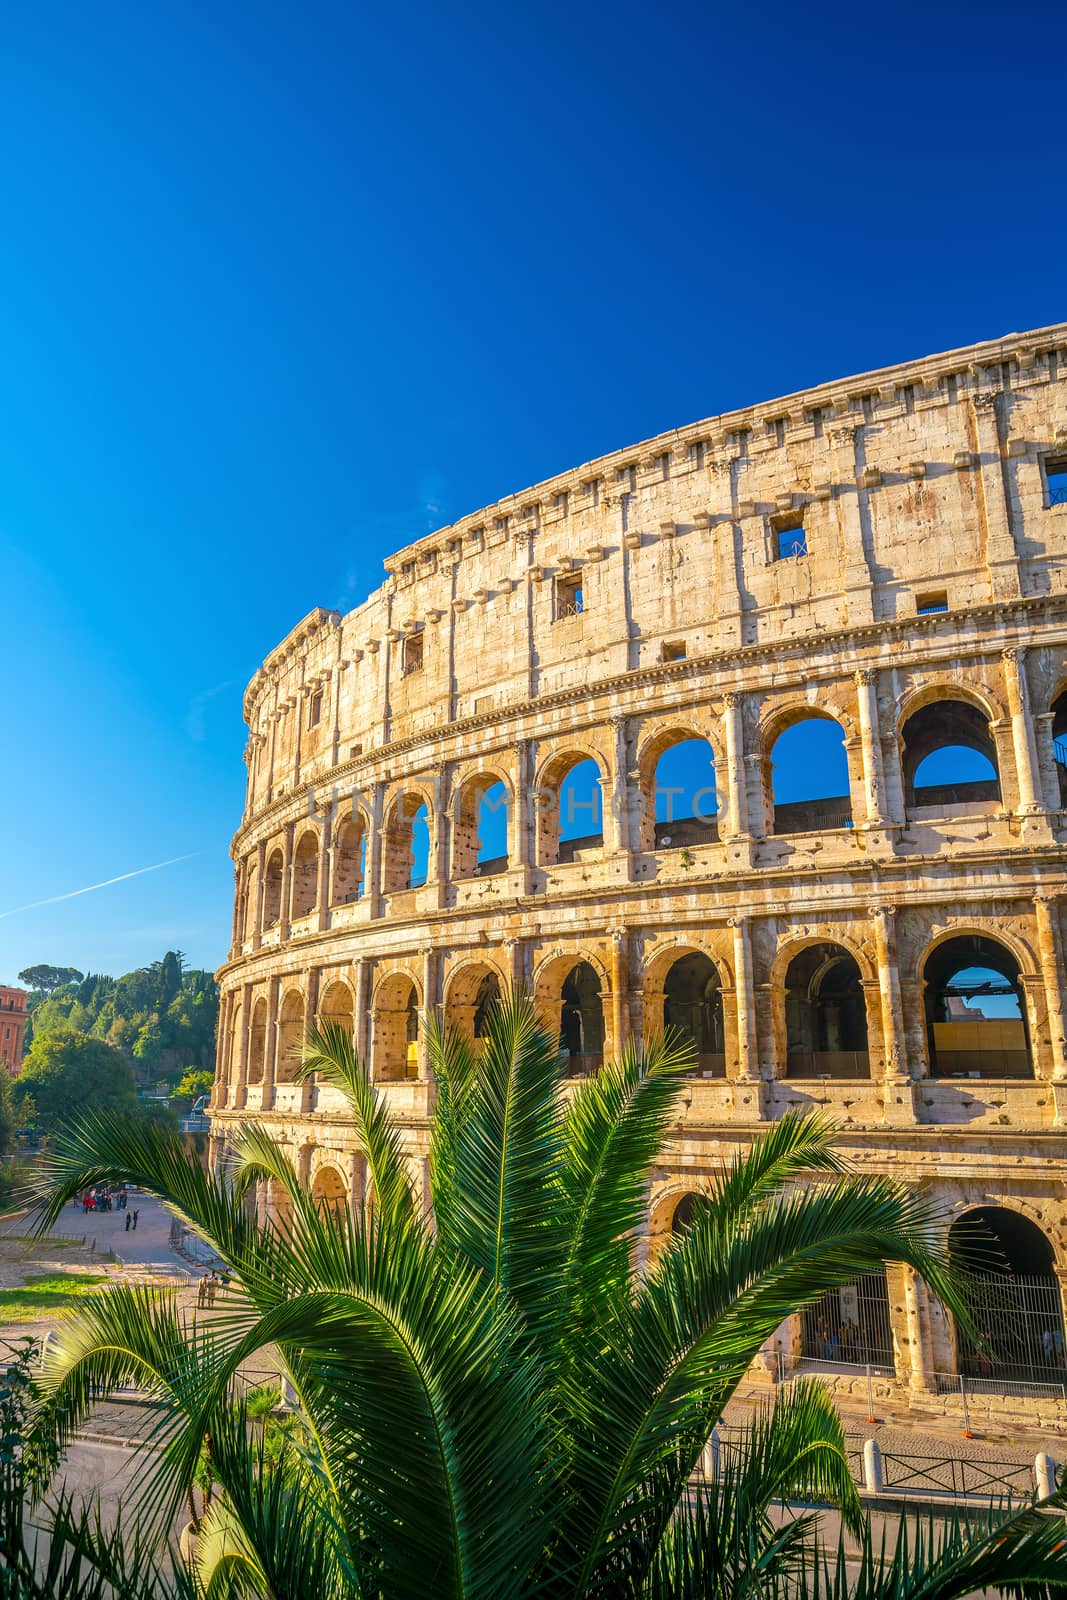 View of Colosseum in Rome, Italy by f11photo